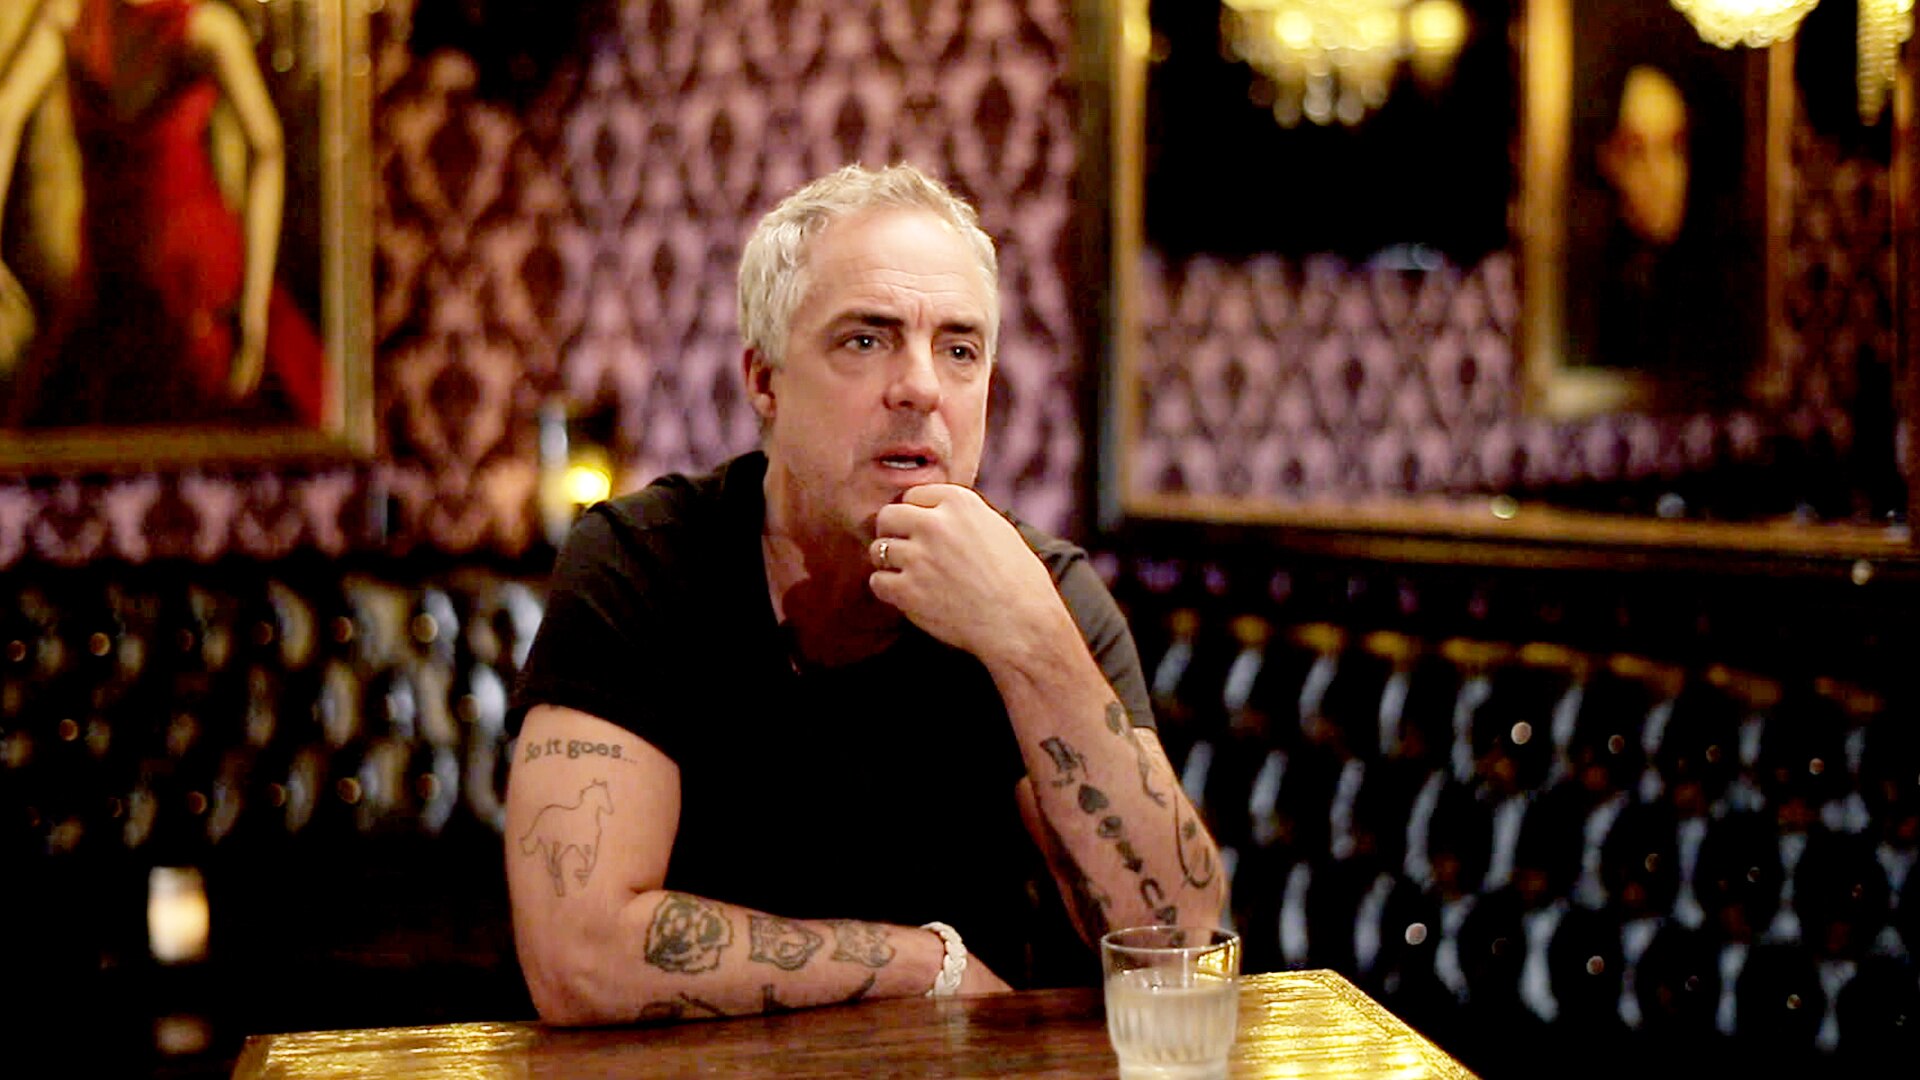 Watch Last Call with Carson Daly Interview: Titus Welliver - NBC.com.